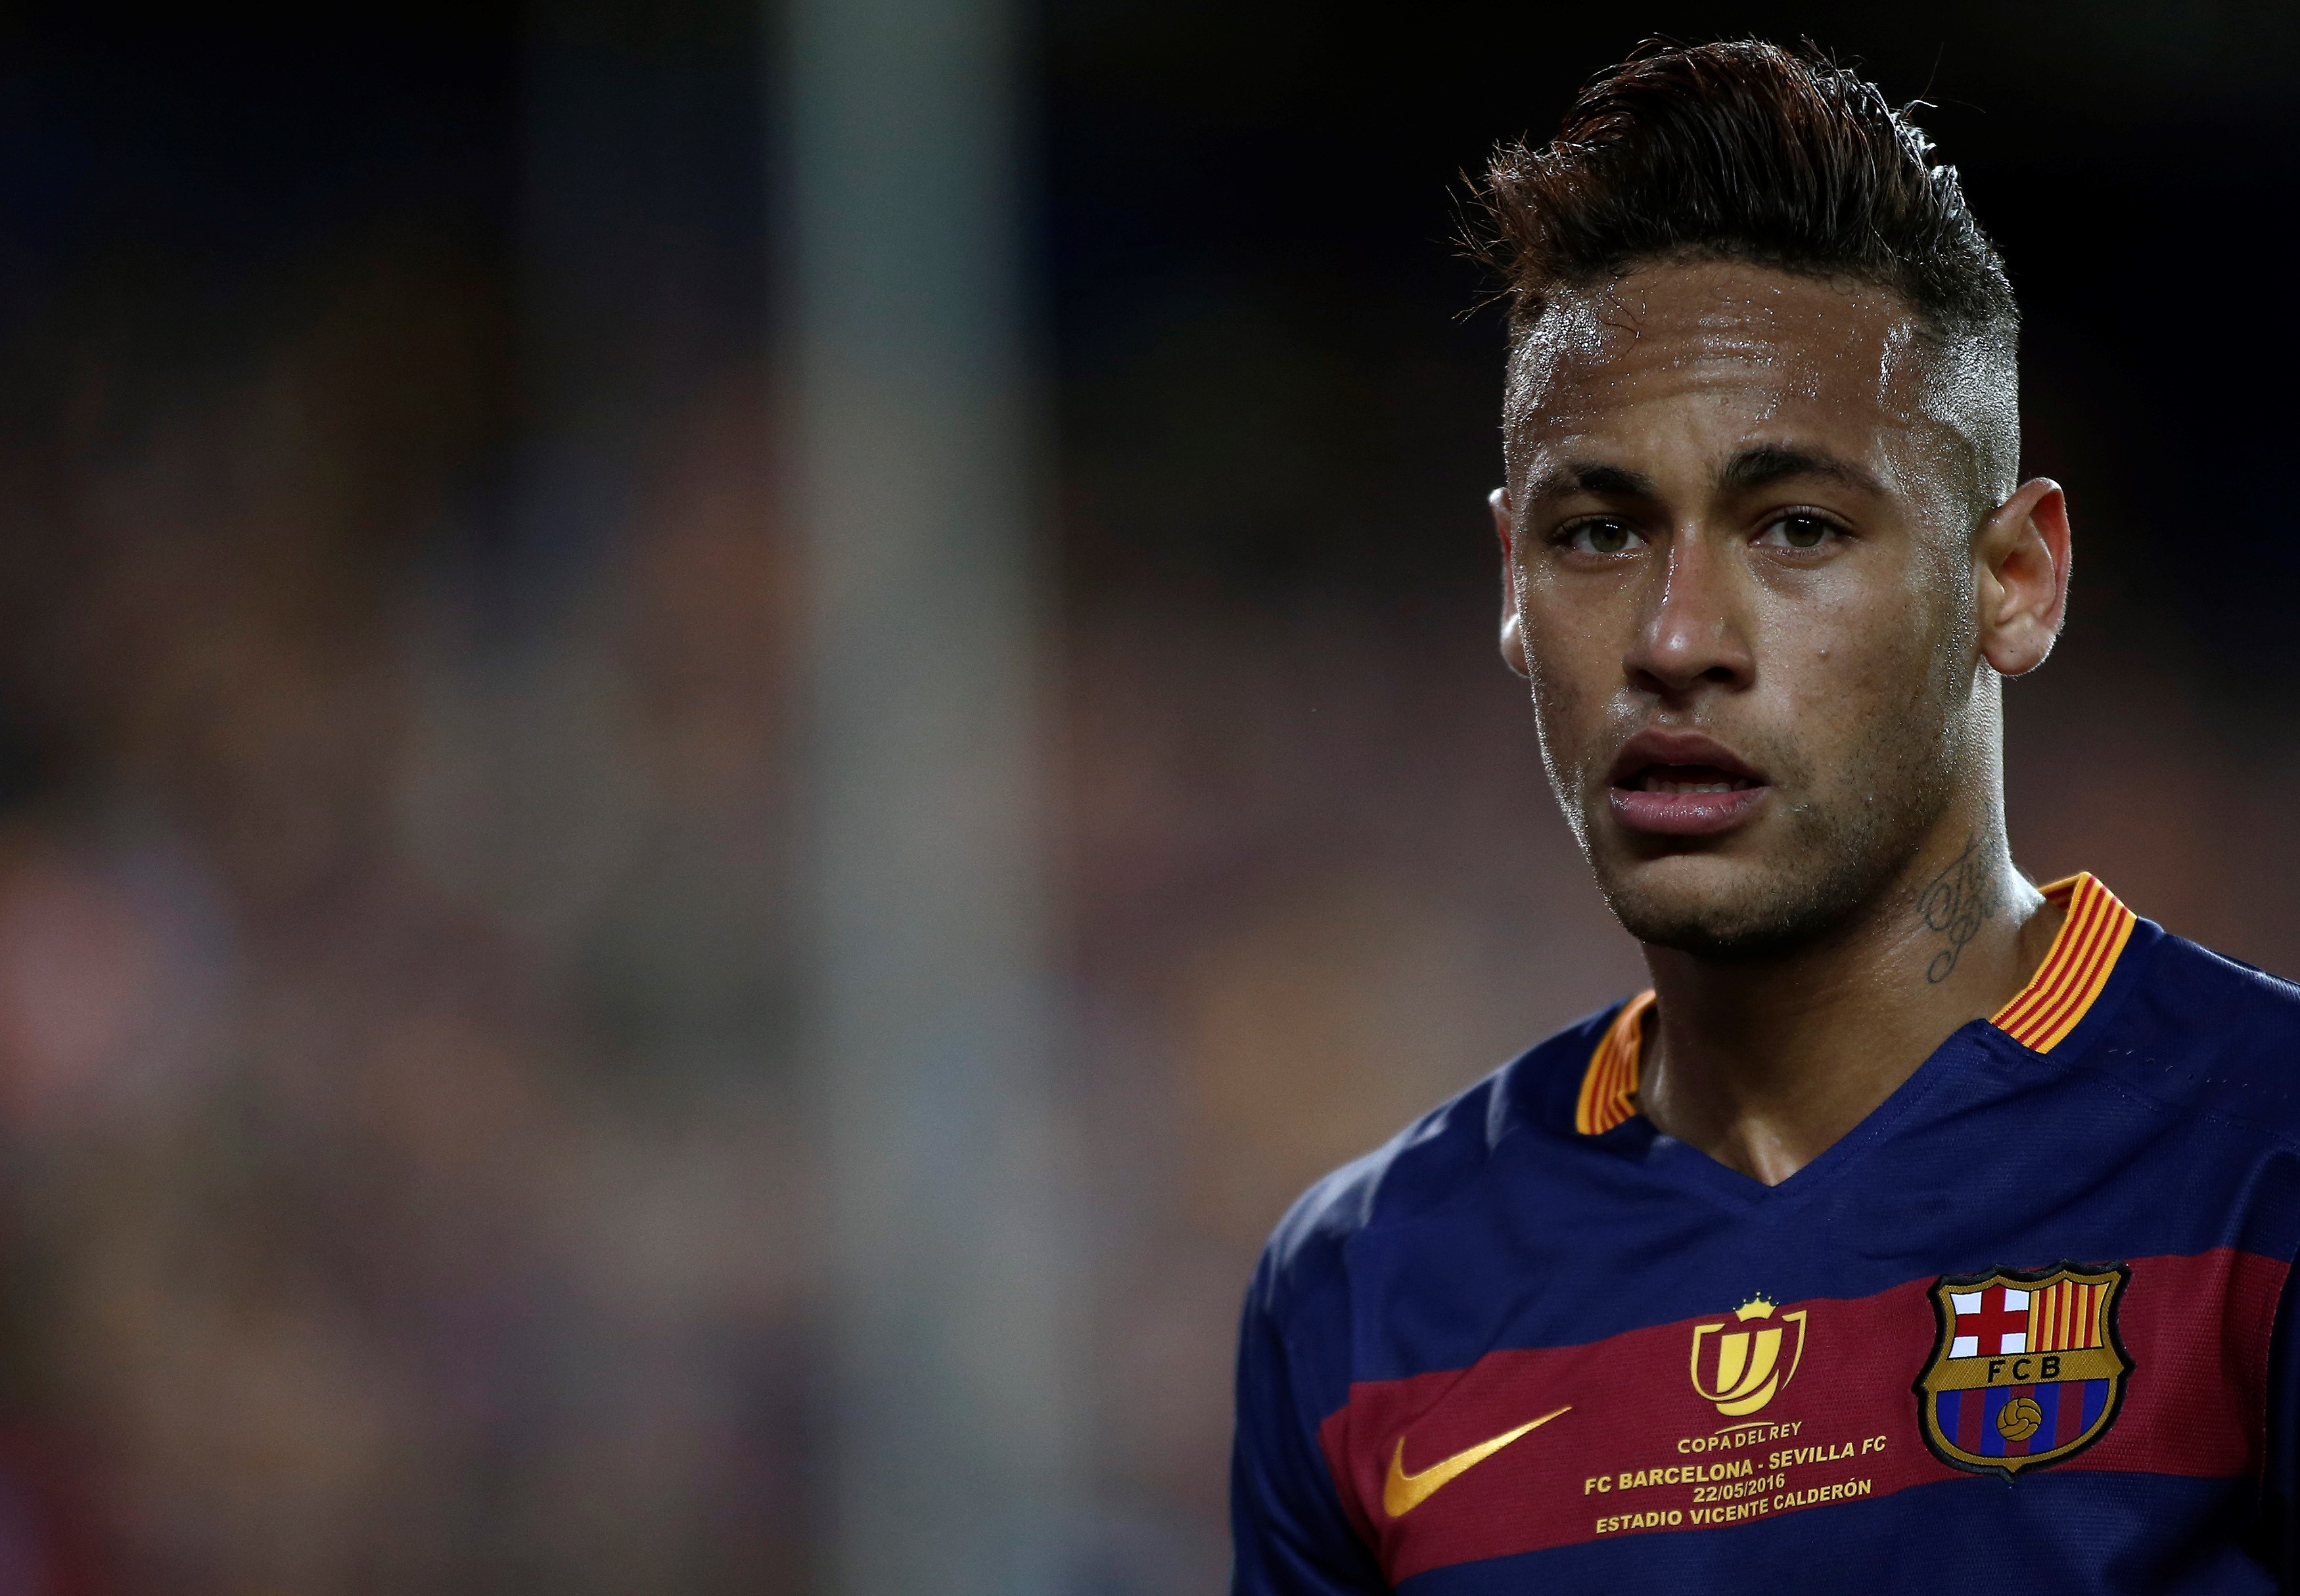 Neymar Wallpapers Images Photos Pictures Backgrounds